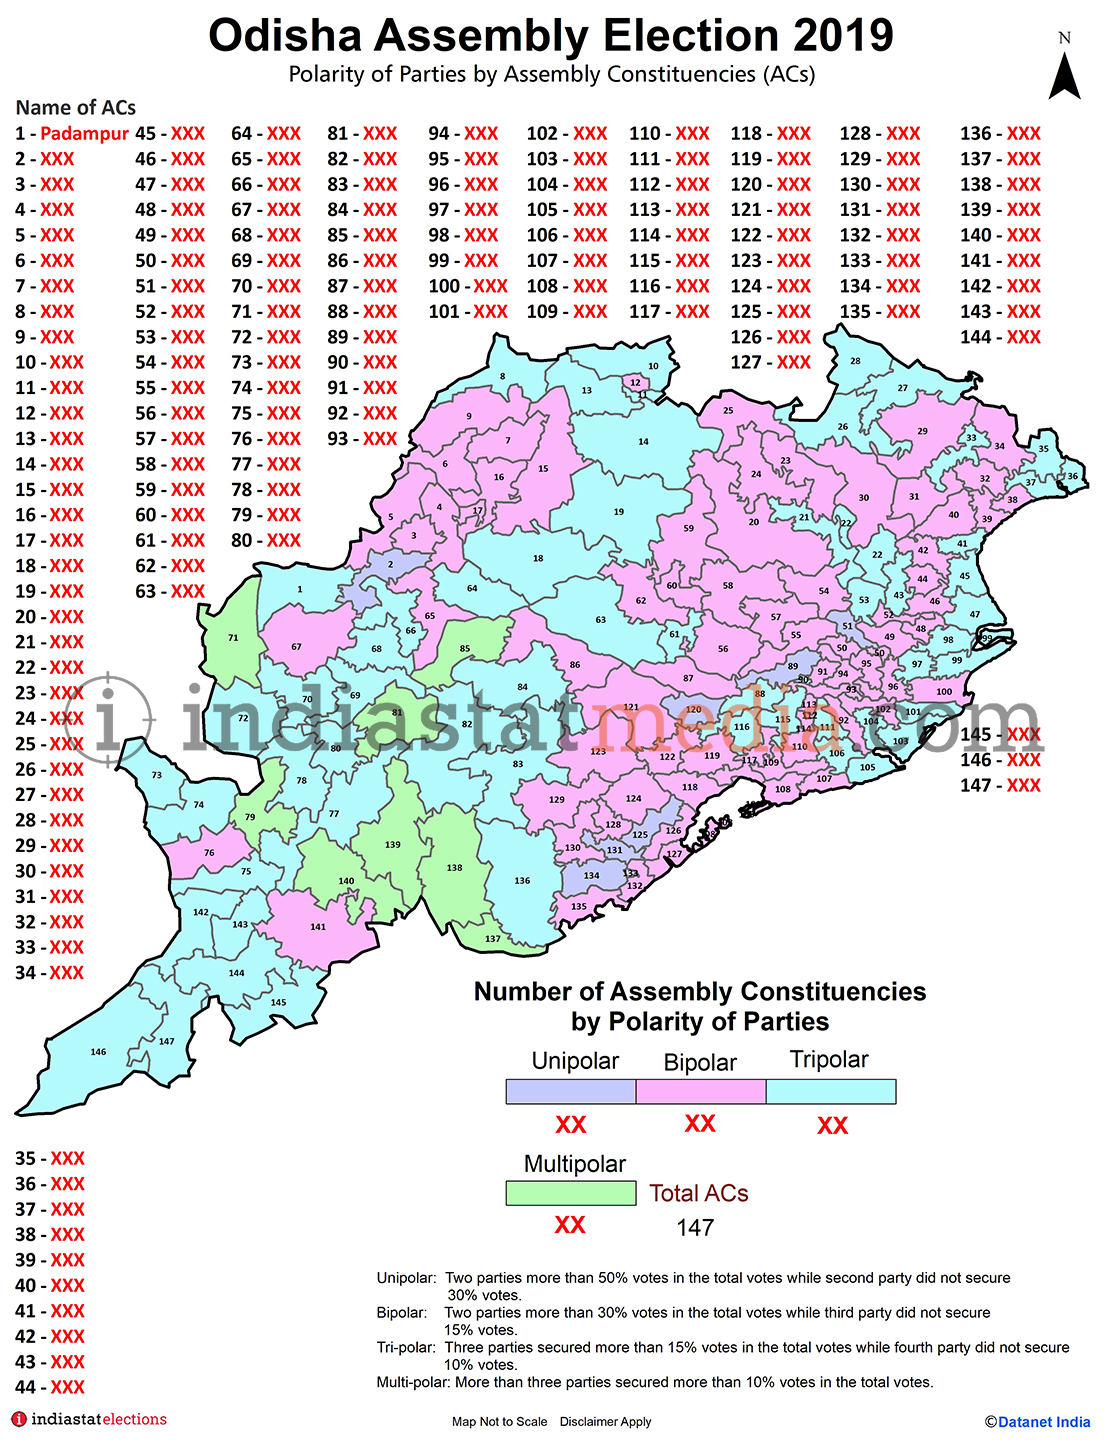 Polarity of Parties by Assembly Constituencies in Odisha (Assembly Election - 2019)